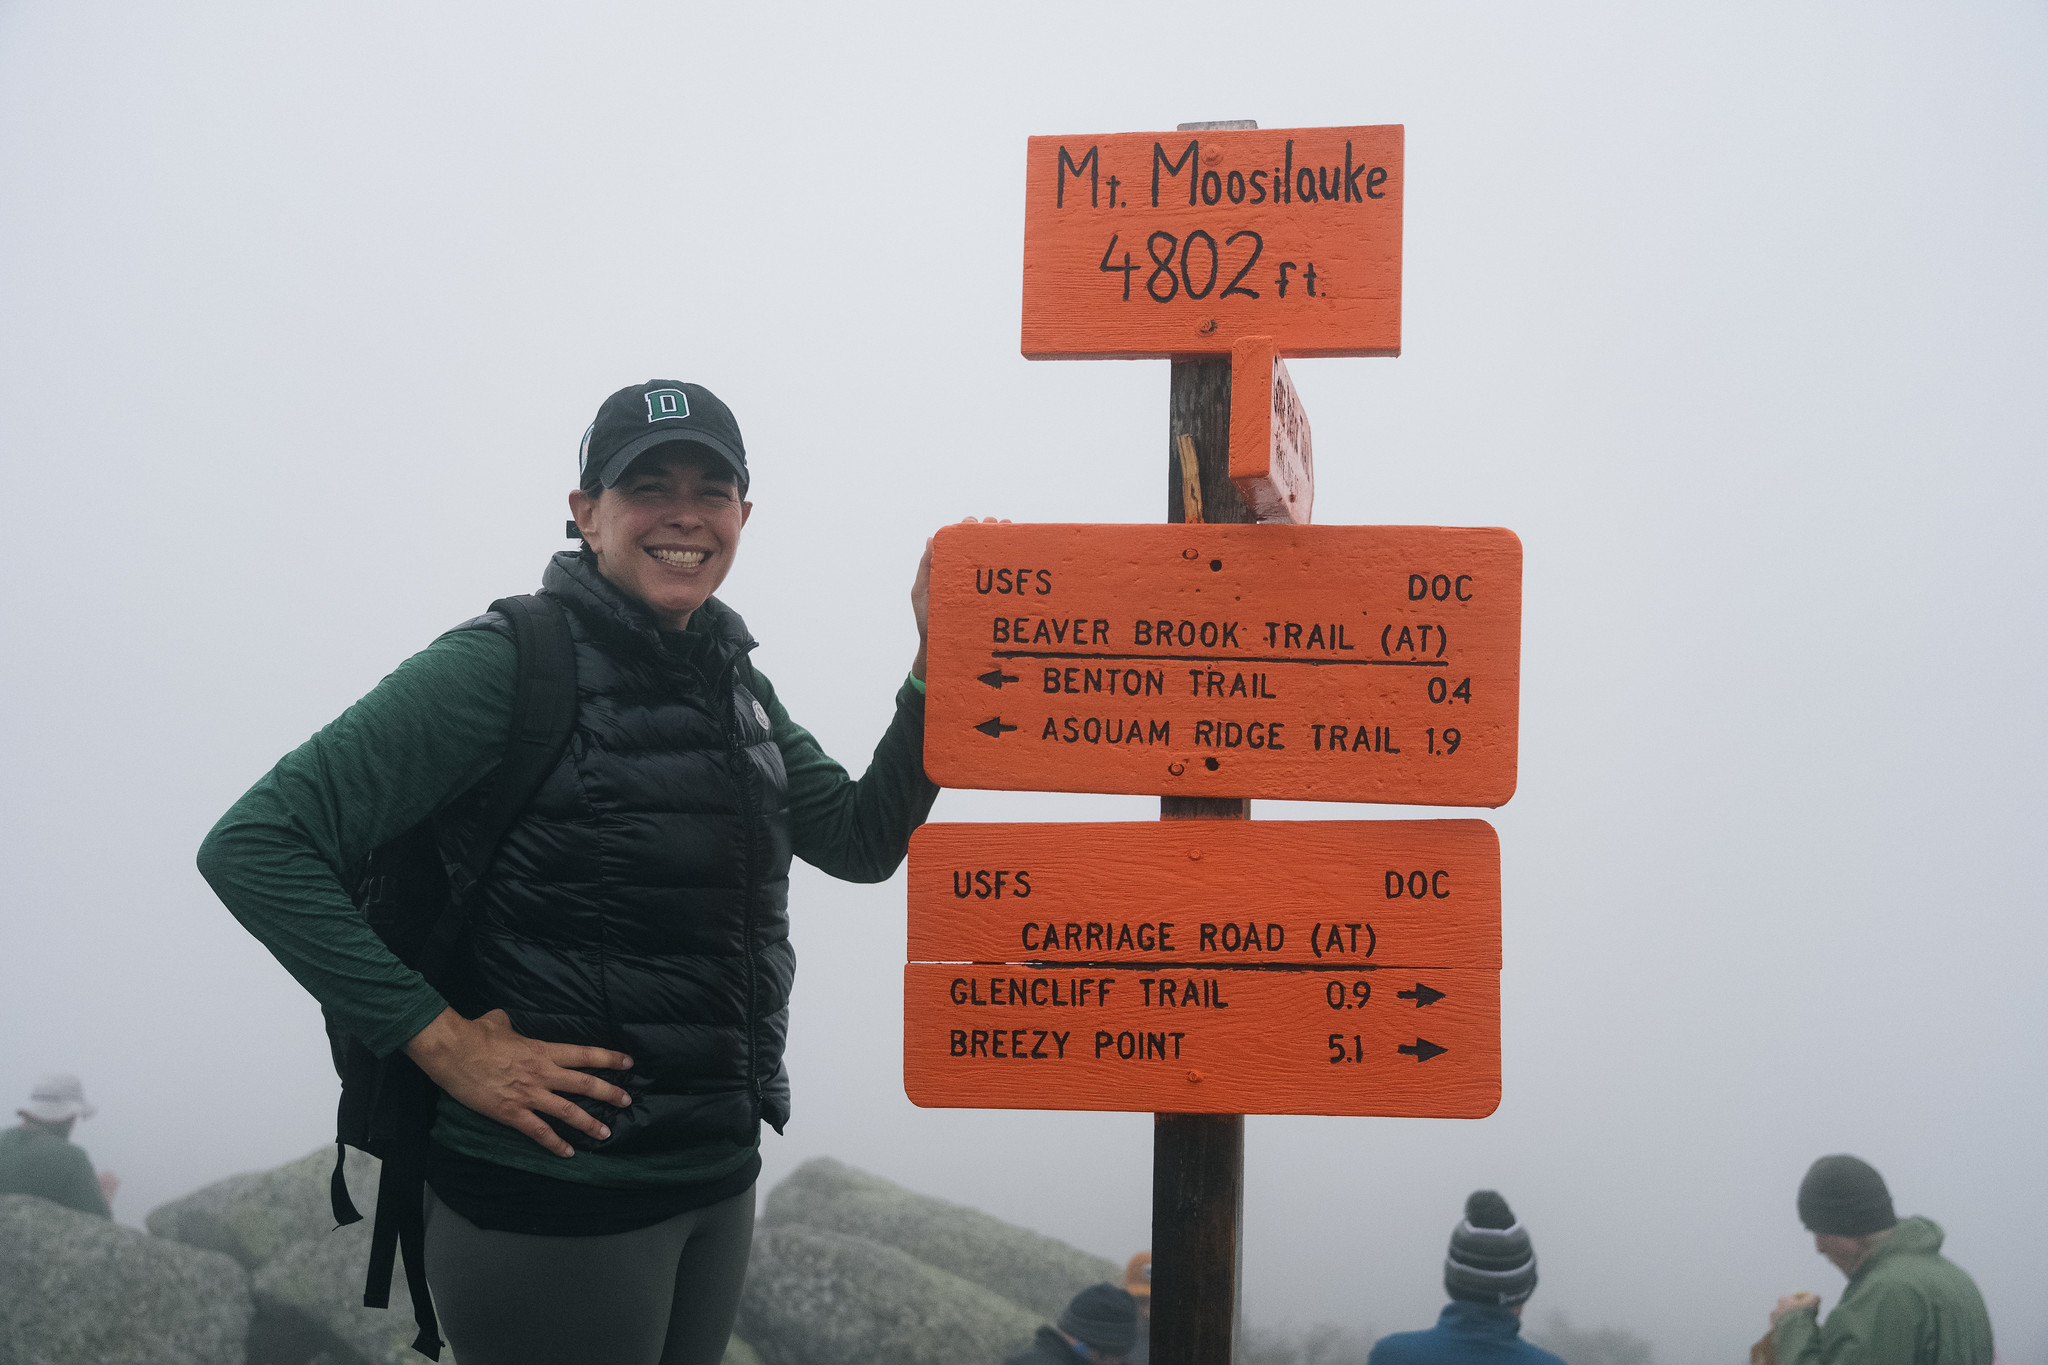 President Beilock with sign post on top of Mt. Moosilauke. 